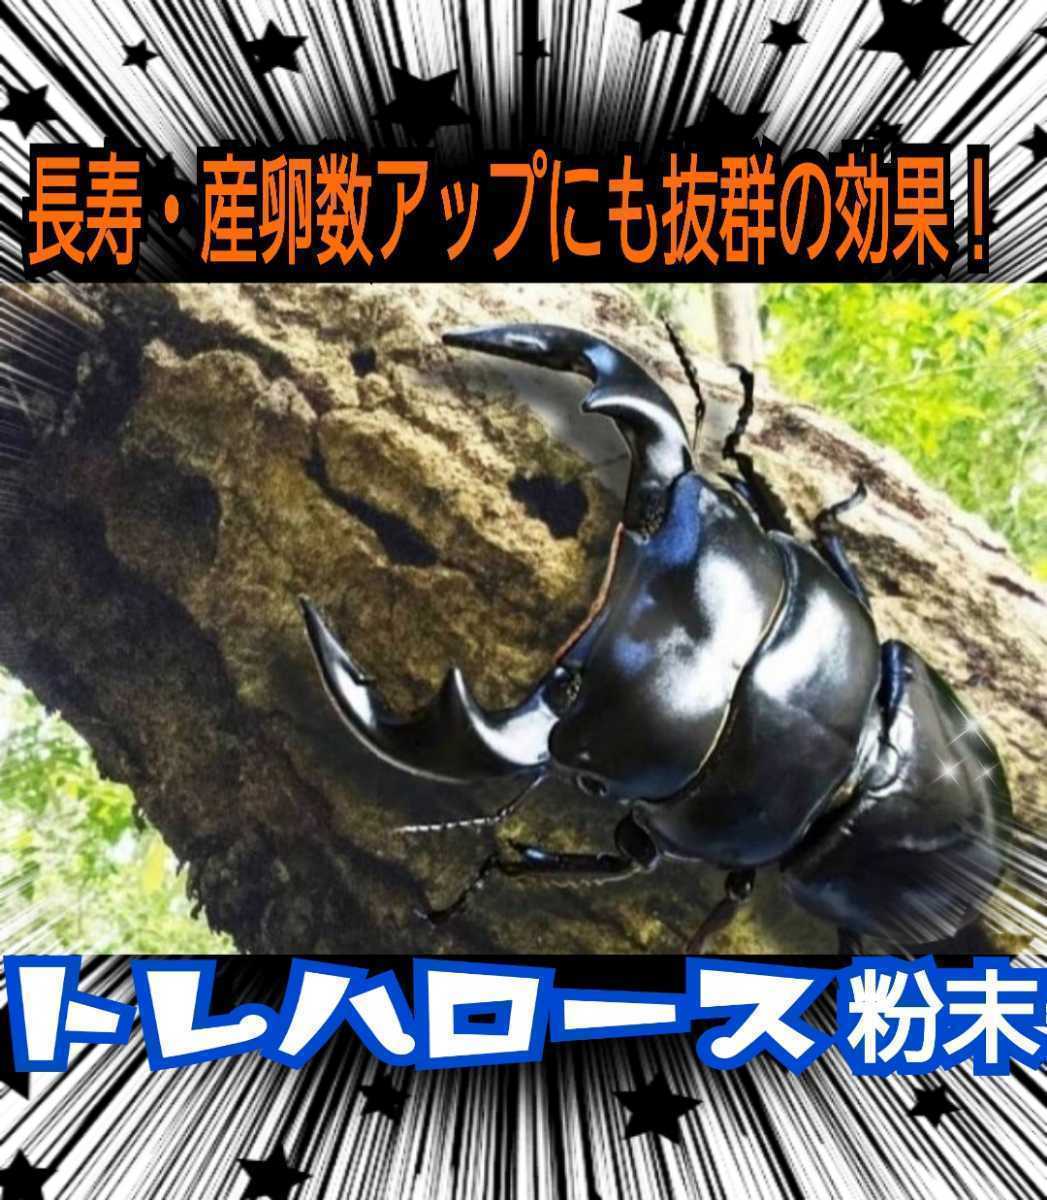  stag beetle * rhinoceros beetle. energy source is kore!tore Hello s powder [2 sack ] mat .. thread, jelly .... only! size up, production egg .., length ..